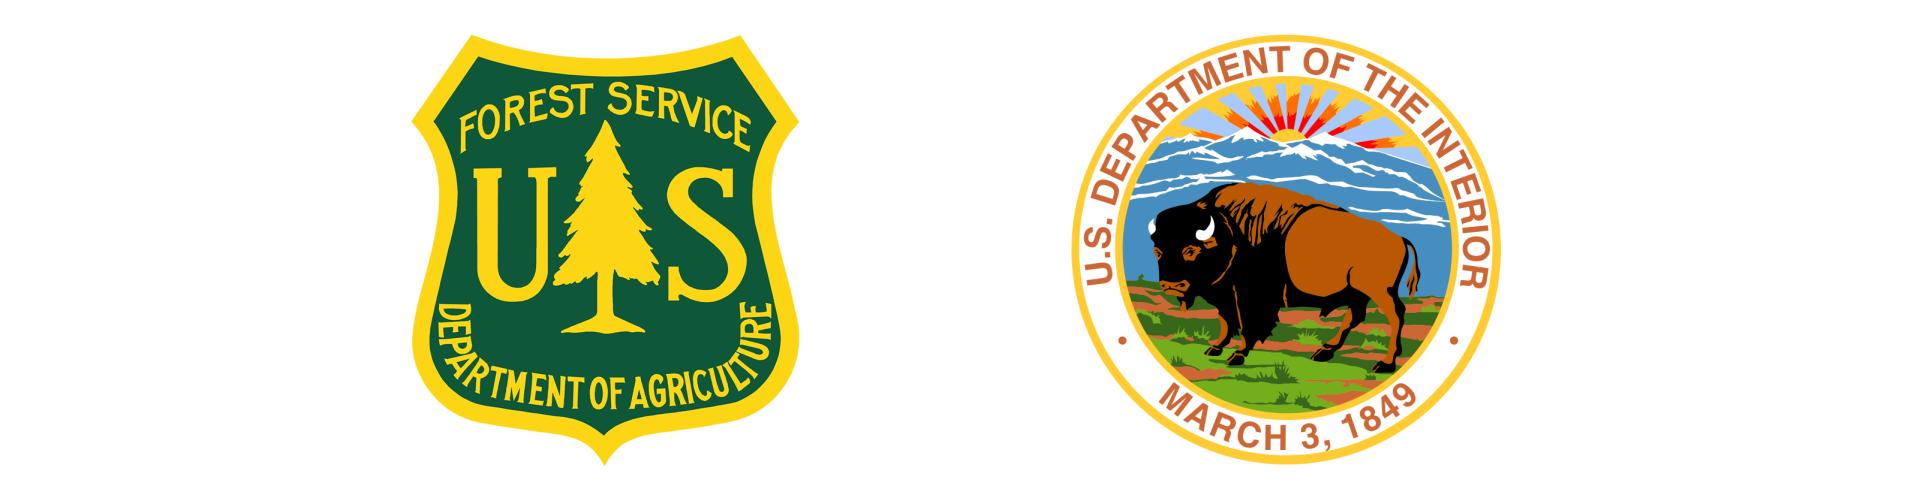 Logos for the U.S. Department of Agriculture Forest Service and U.S. Department of Agriculture